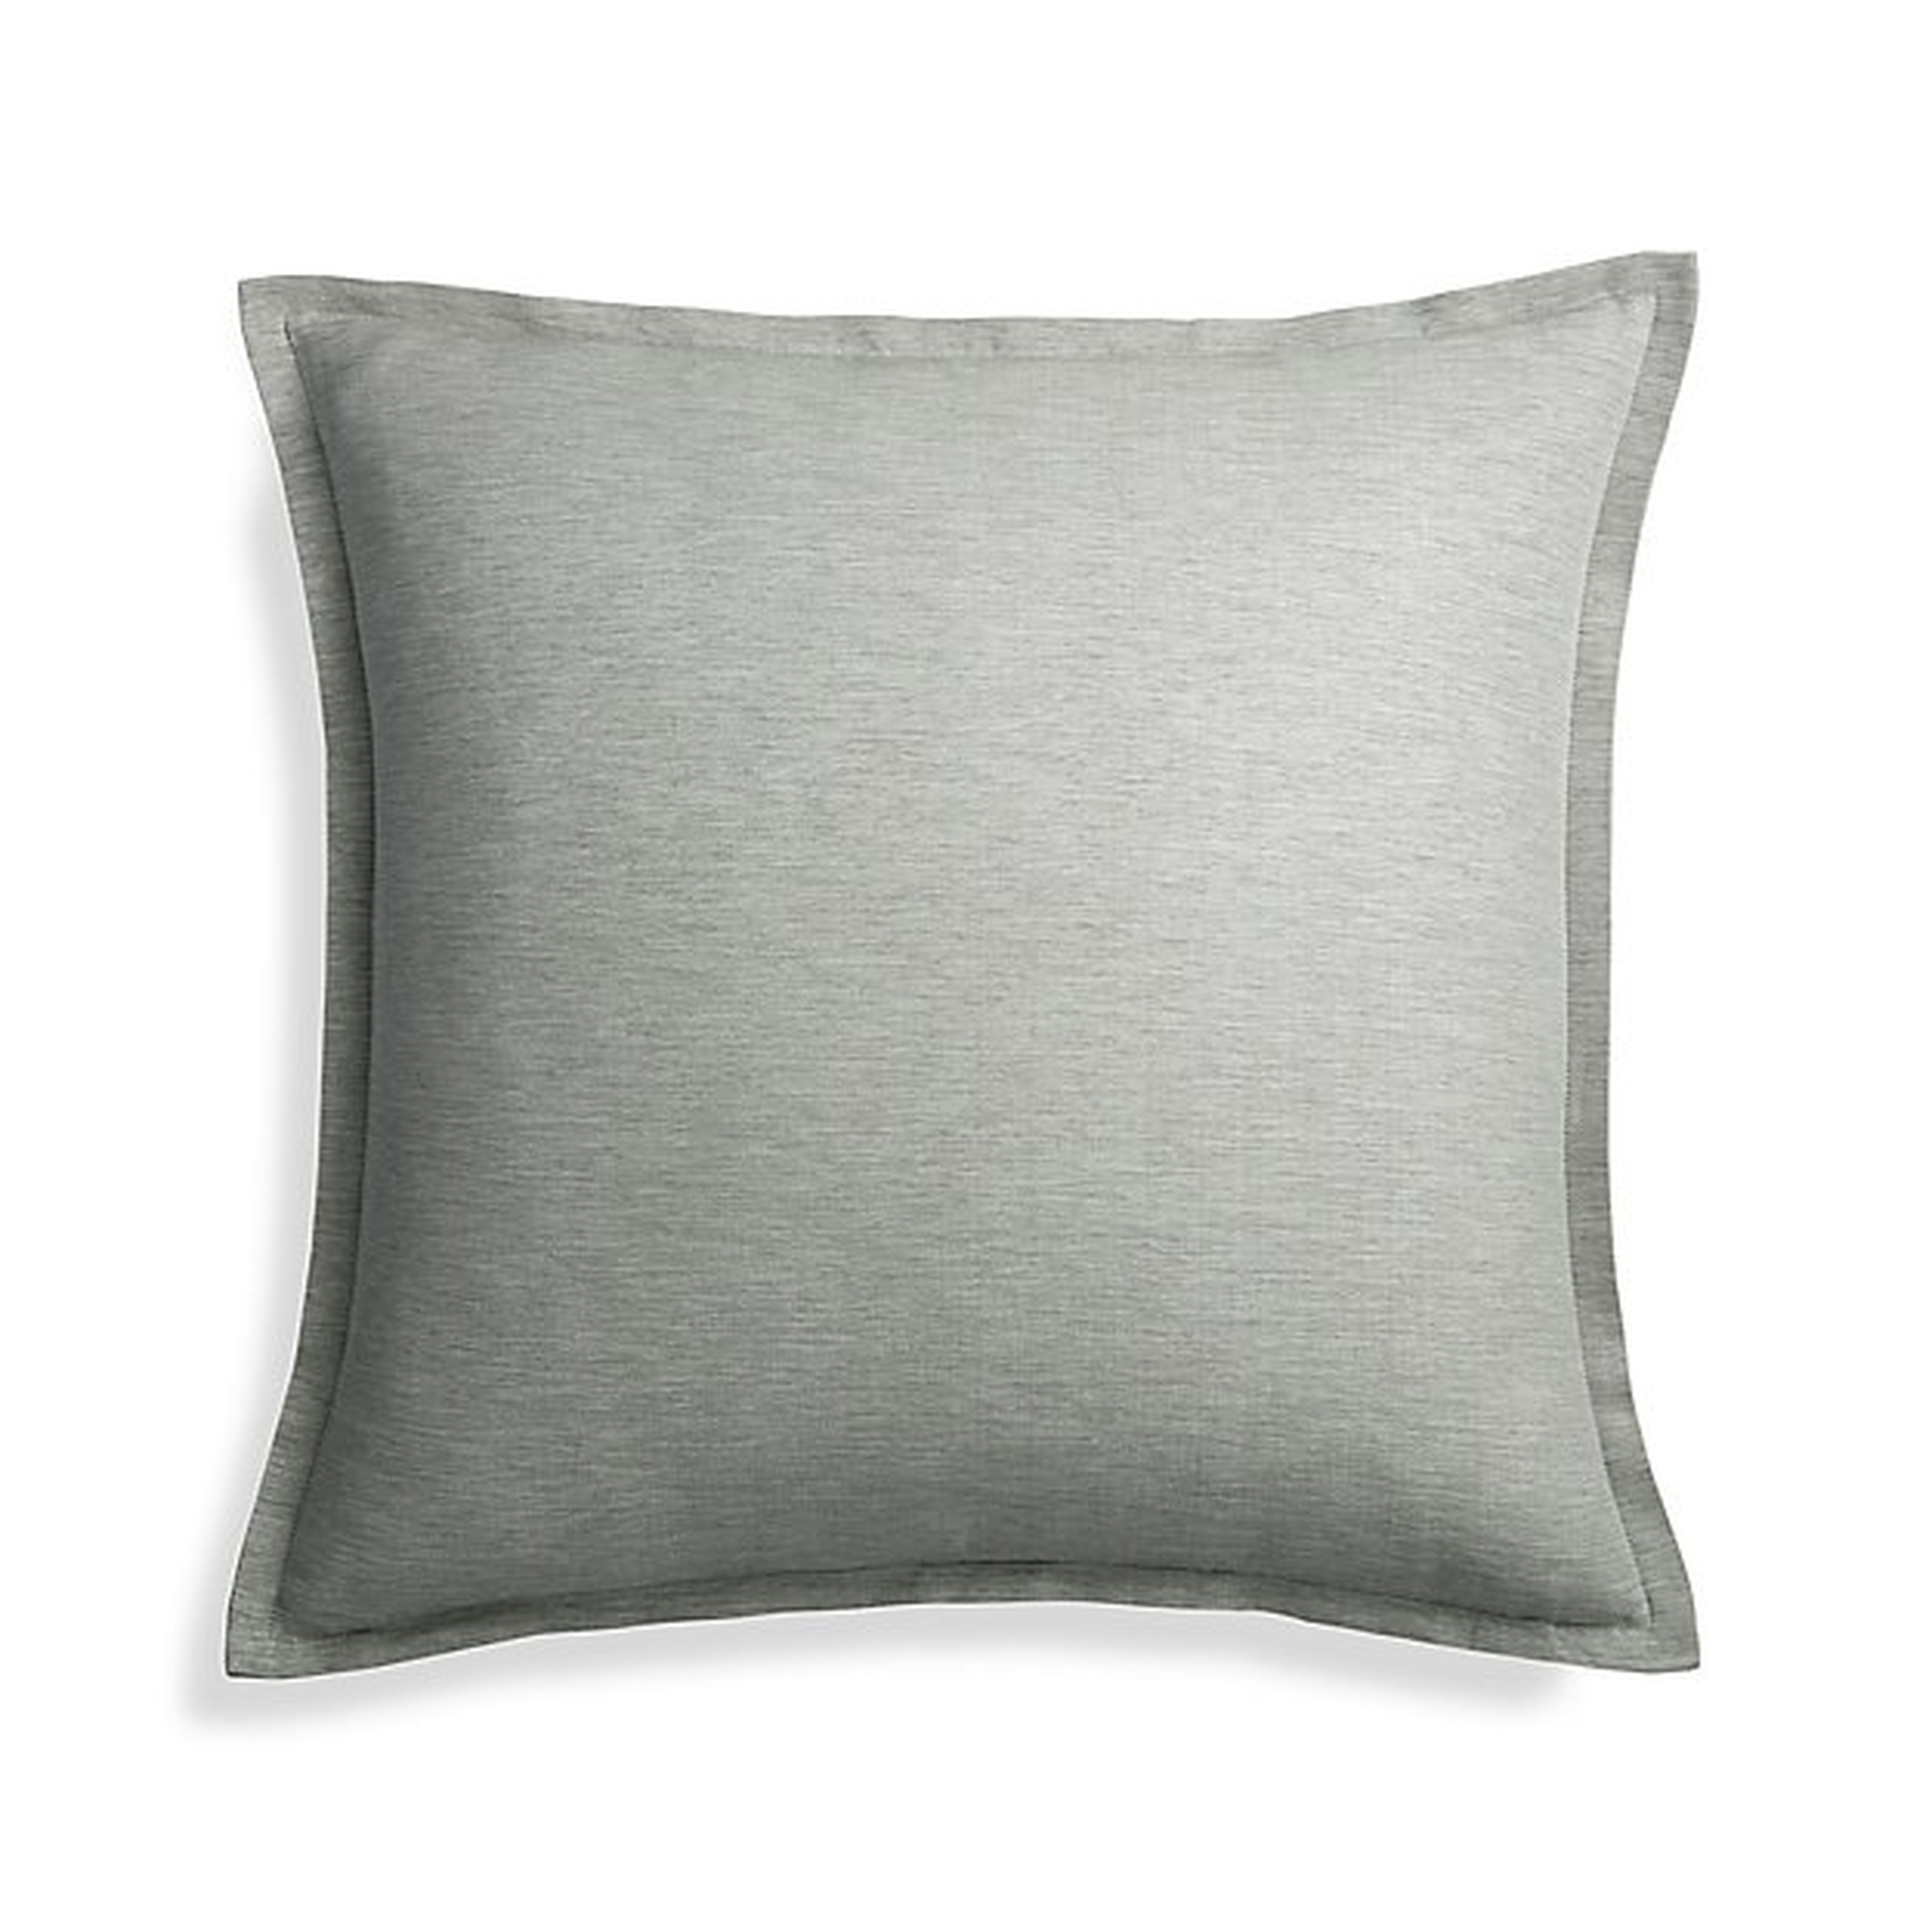 Linden Grey 23" Pillow with Down-Alternative Insert - Crate and Barrel